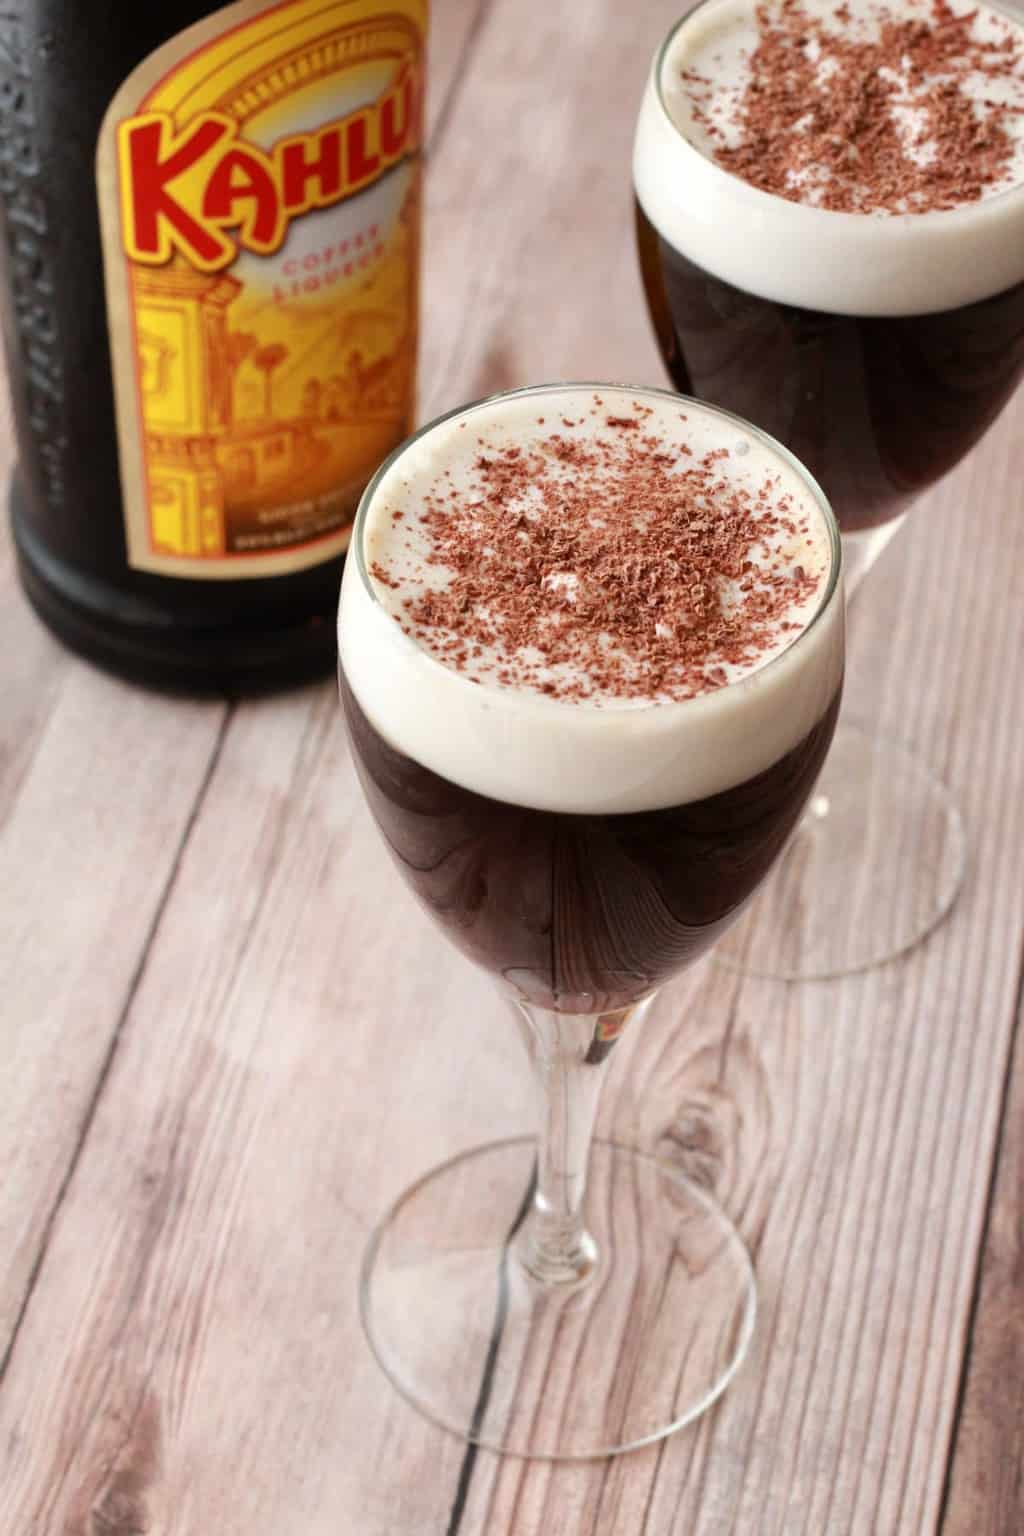 III. What Makes Kahlua Unique and Irresistible?